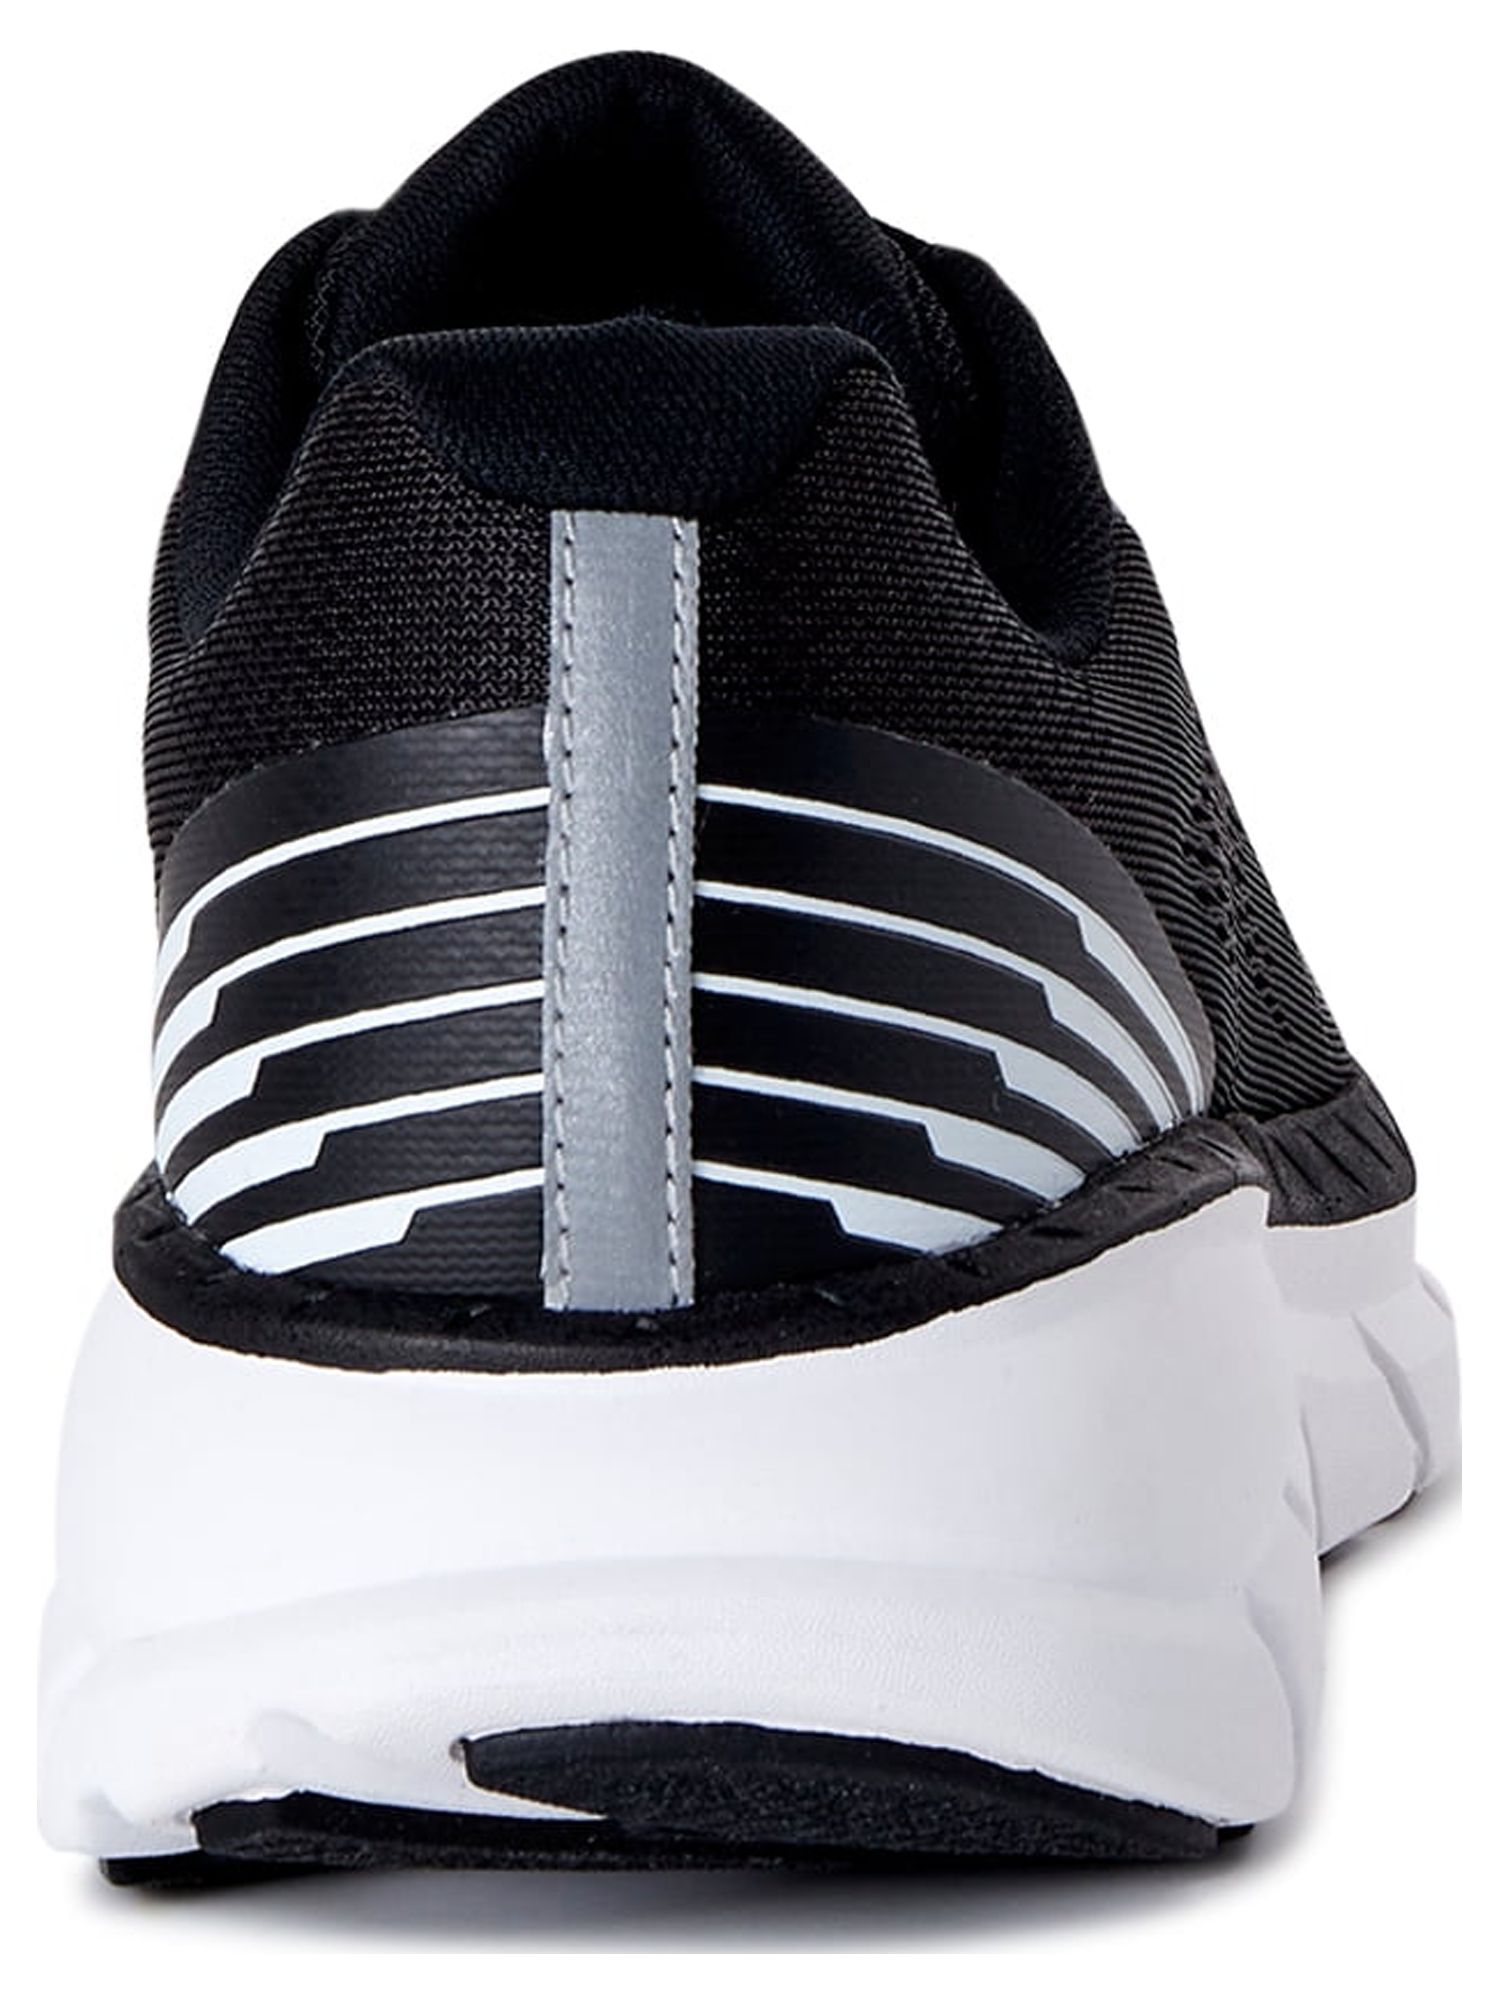 Avia Women's Hightail Athletic Sneakers, Wide Width Available - image 5 of 6